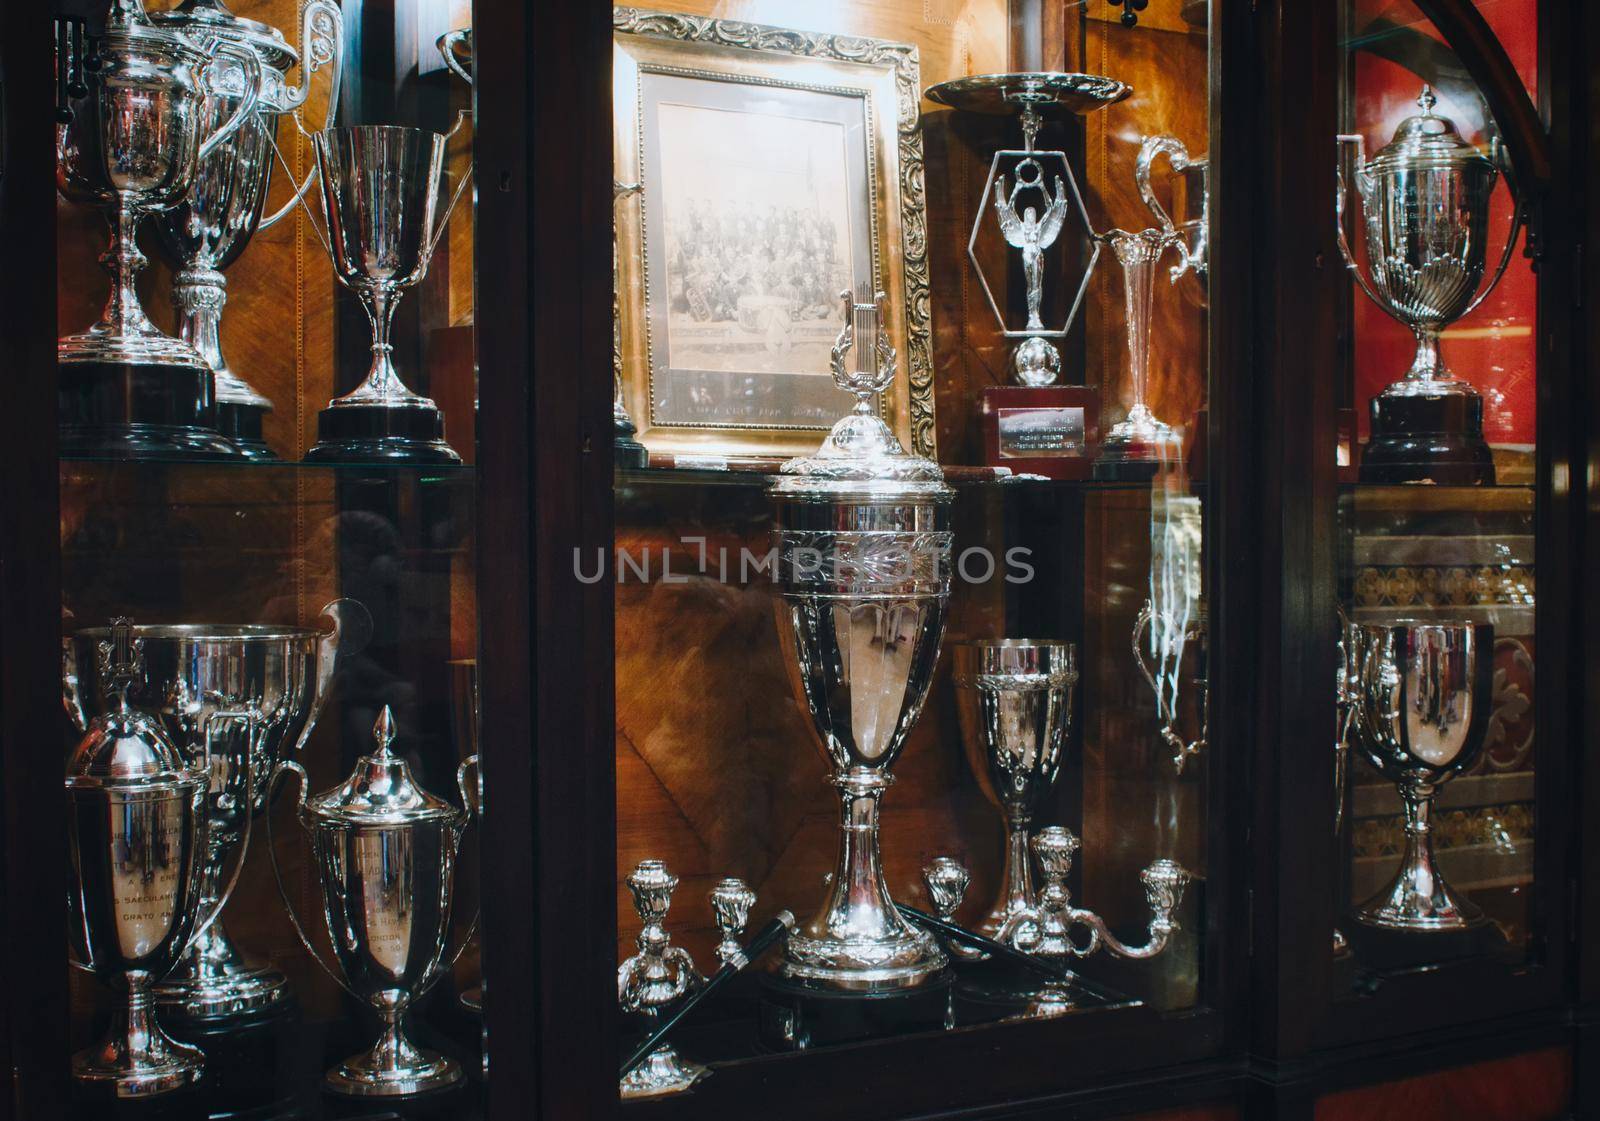 Rabat / Malta - December 30 2019: Shiny trophies in an illuminated classic style trophy cabinet